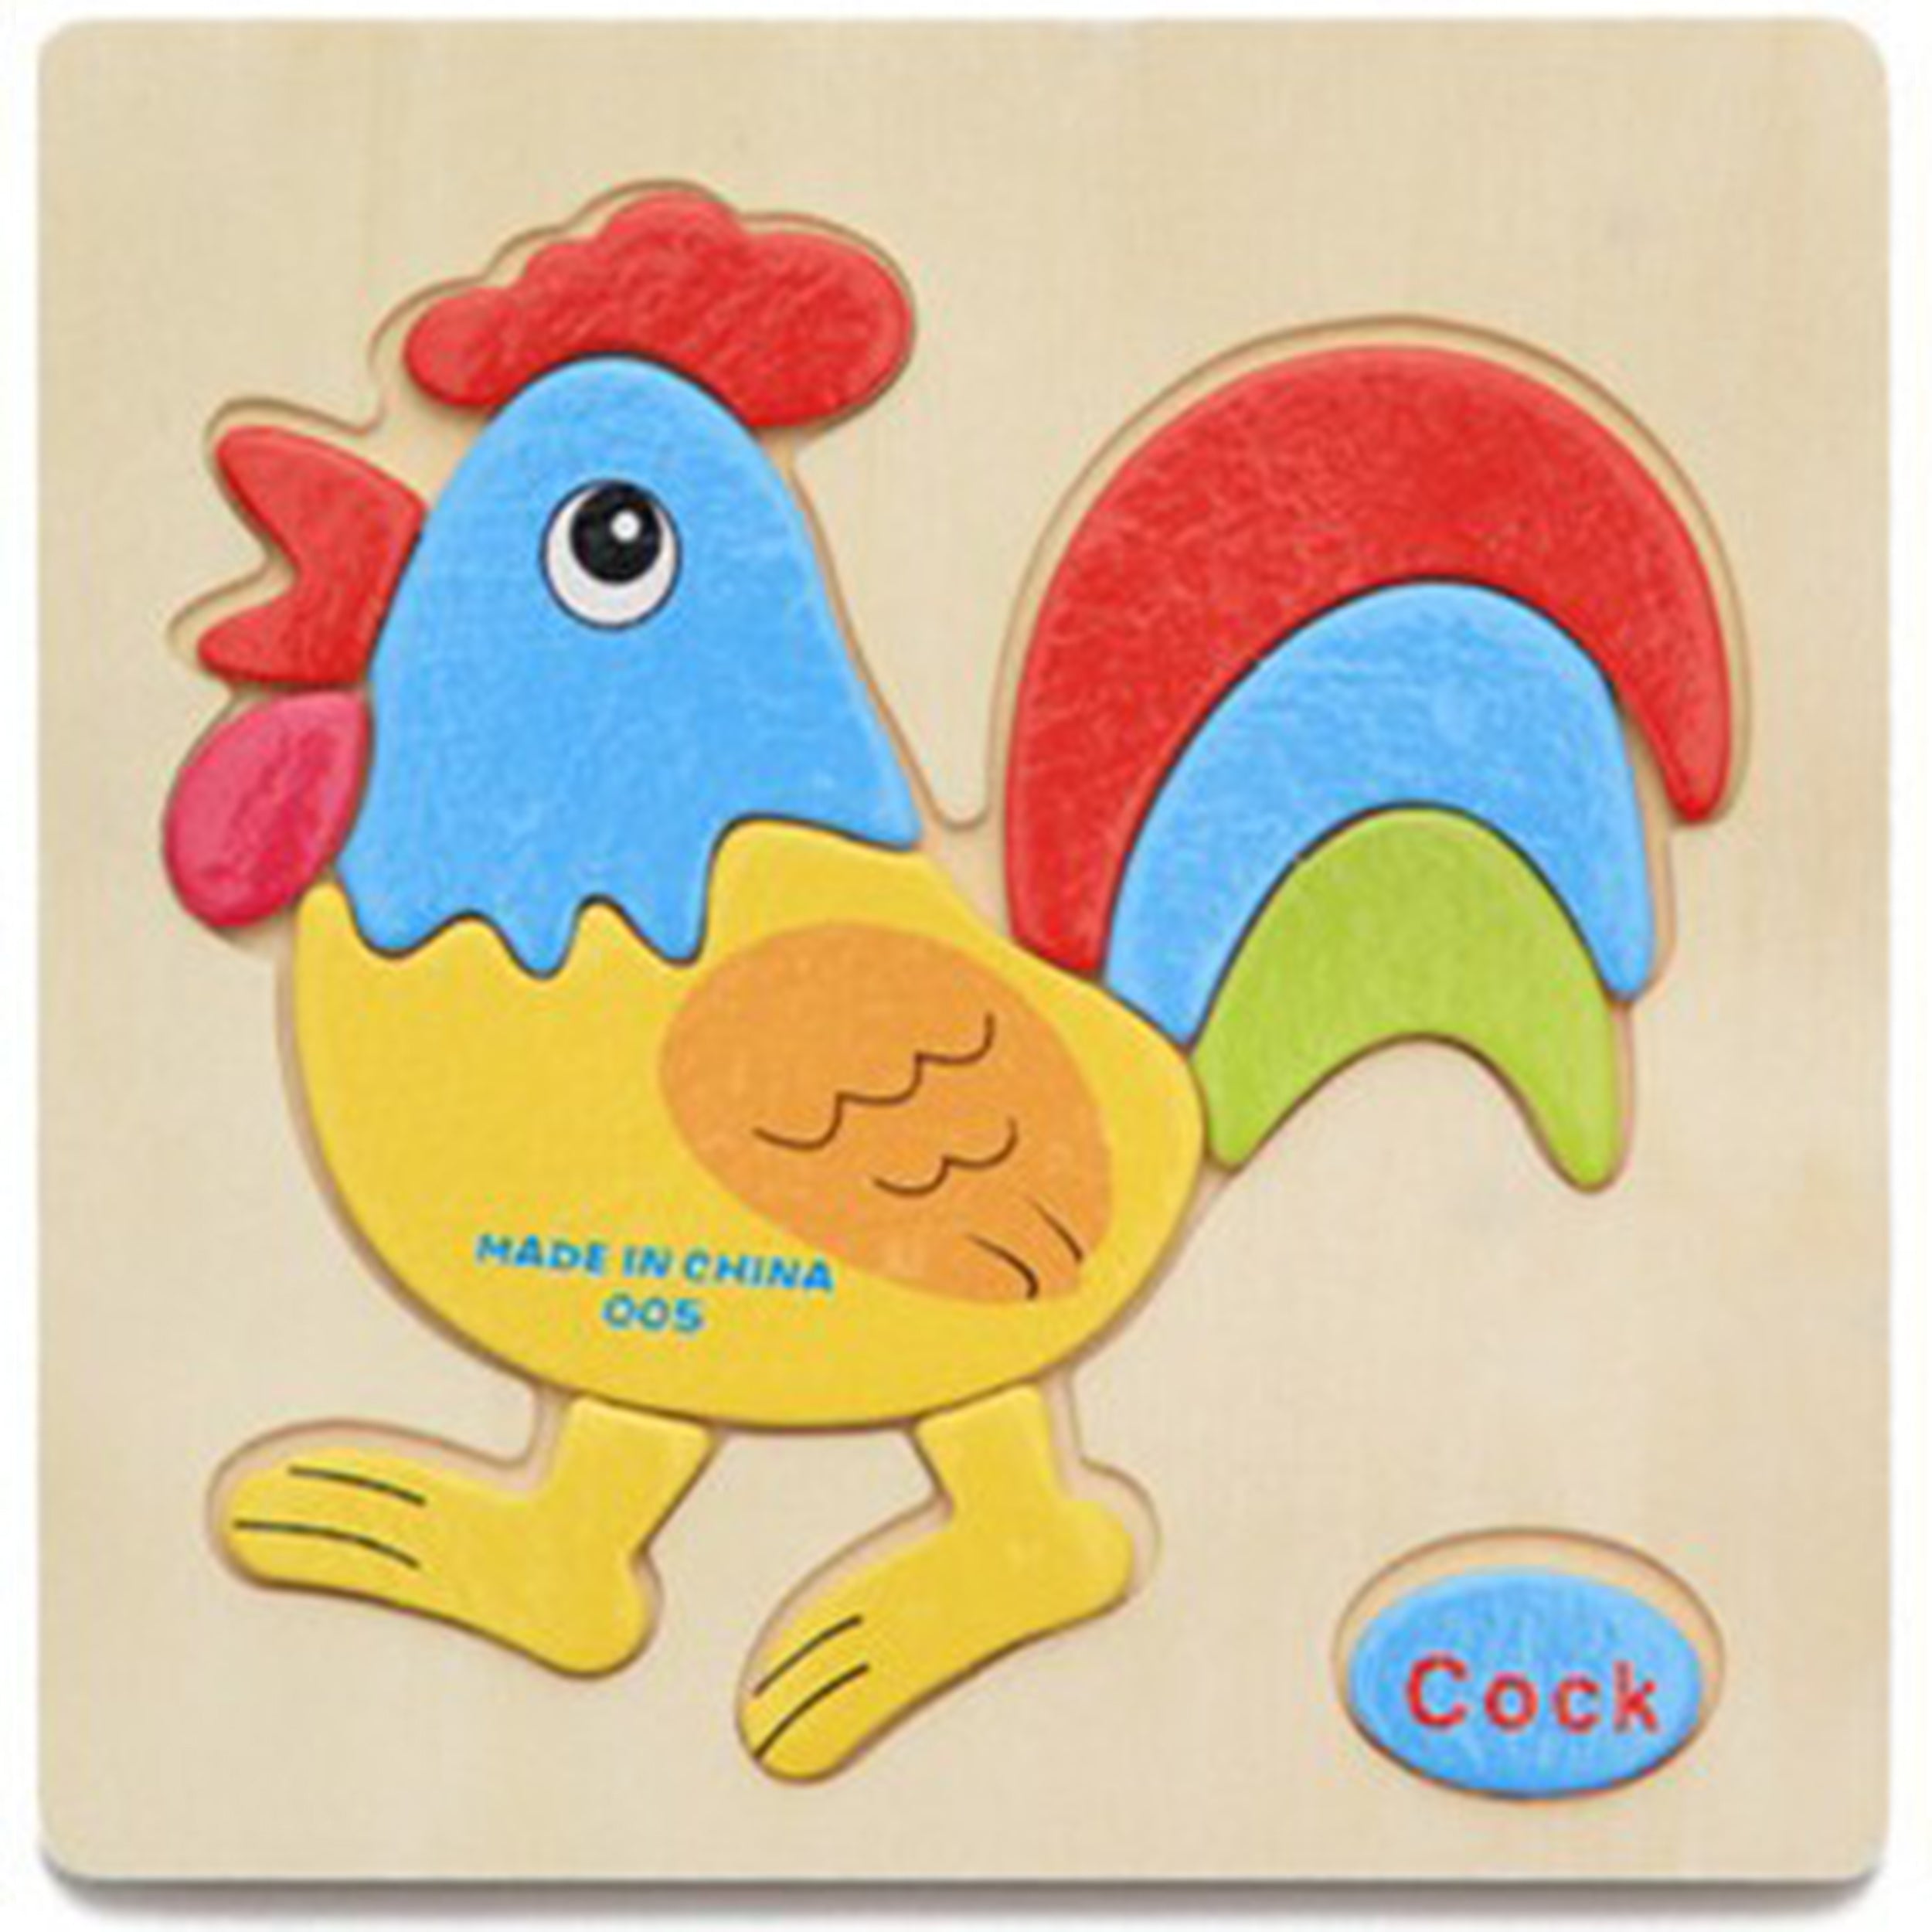 Wooden Puzzle For Kids And Toddlers Animal - Assorted Designs